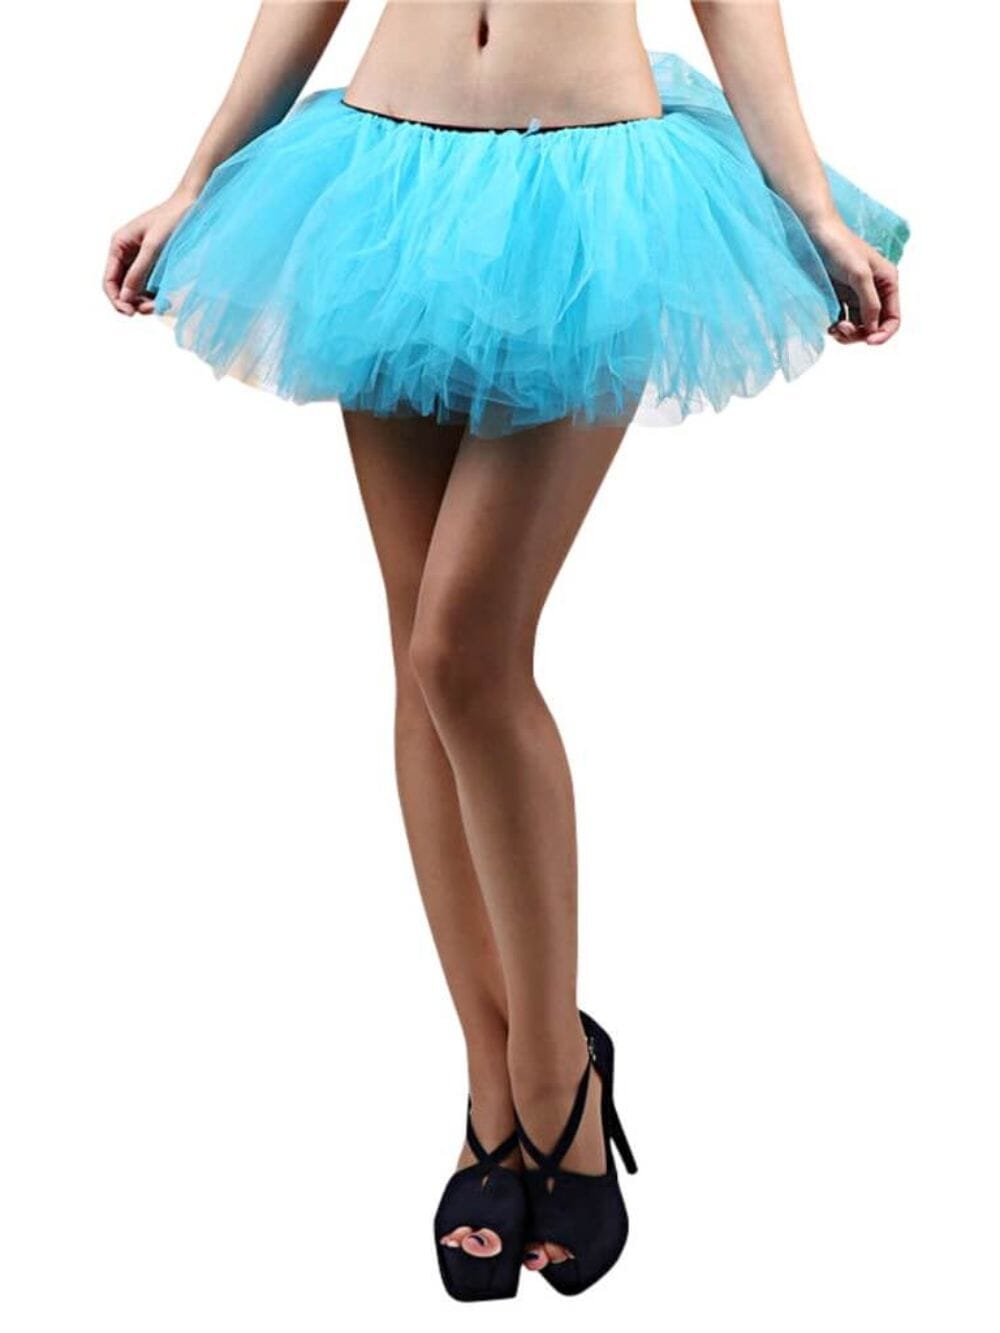 Turquoise Blue - 5 Layer Tutu Skirt for Running, Dress-Up, Costumes - Sydney So Sweet